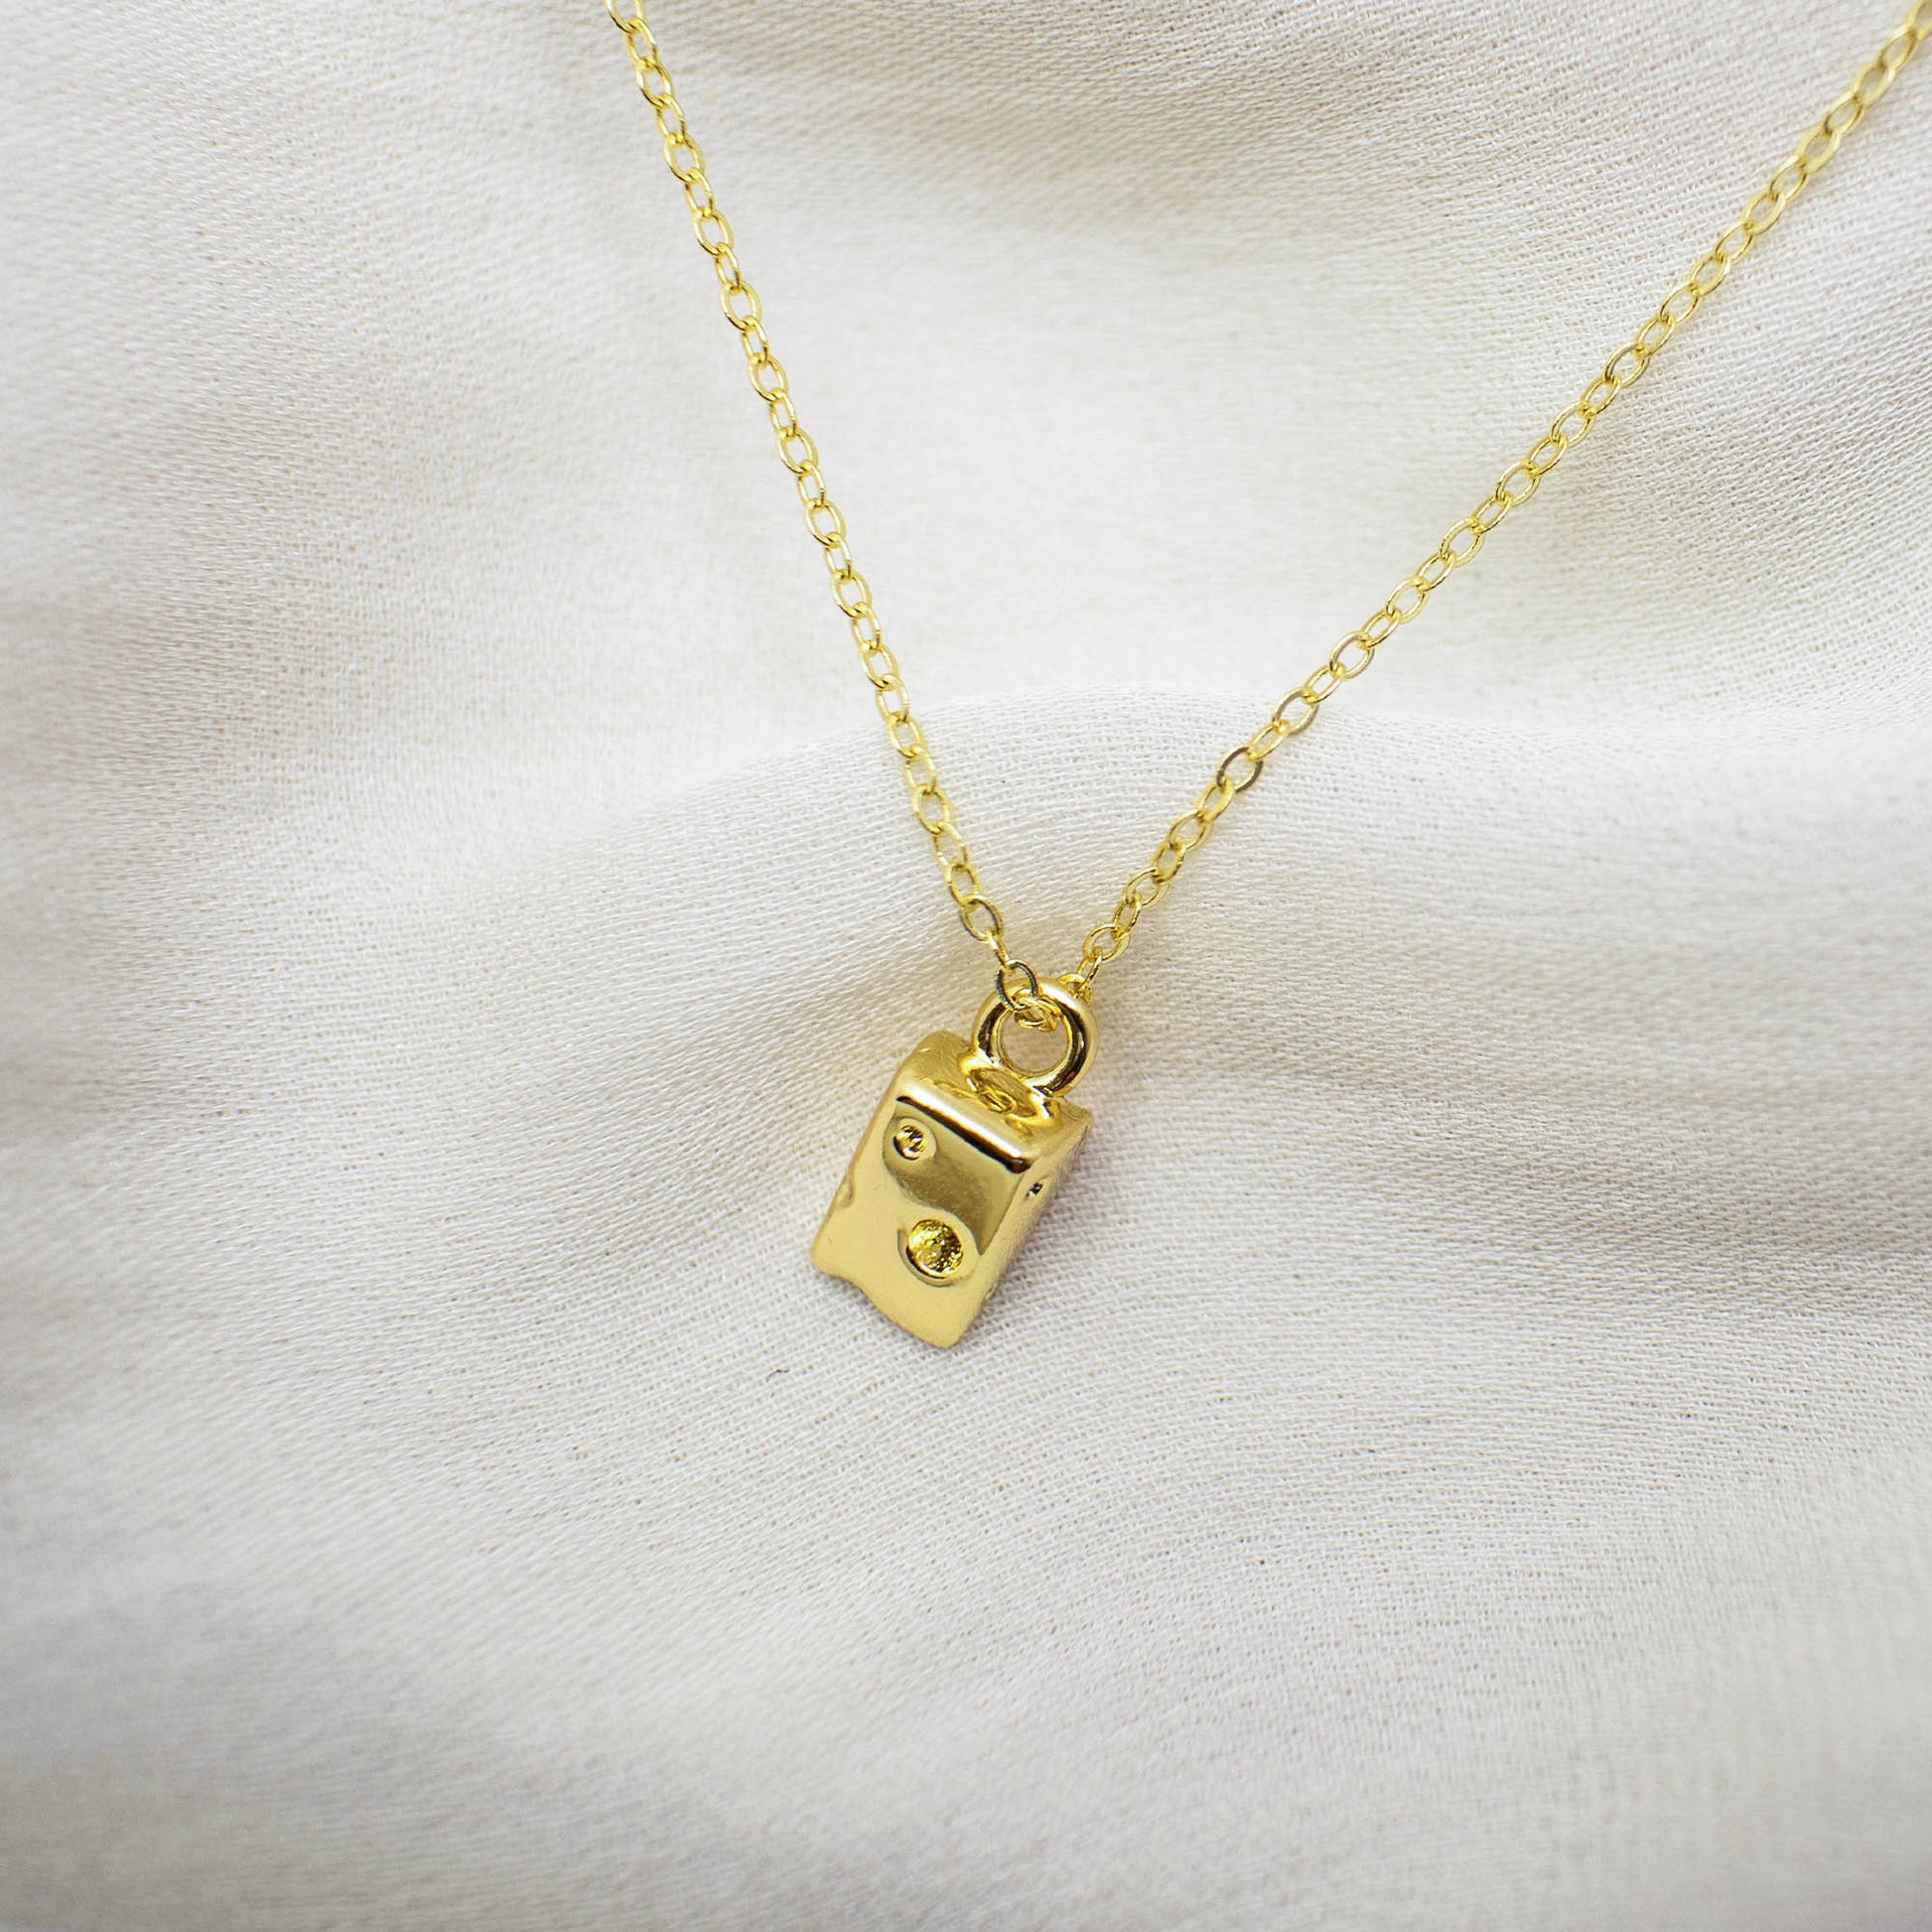 This photo features a thin chain necklace made of 14K gold-plated sterling silver, paired with a mini cheese pendant.